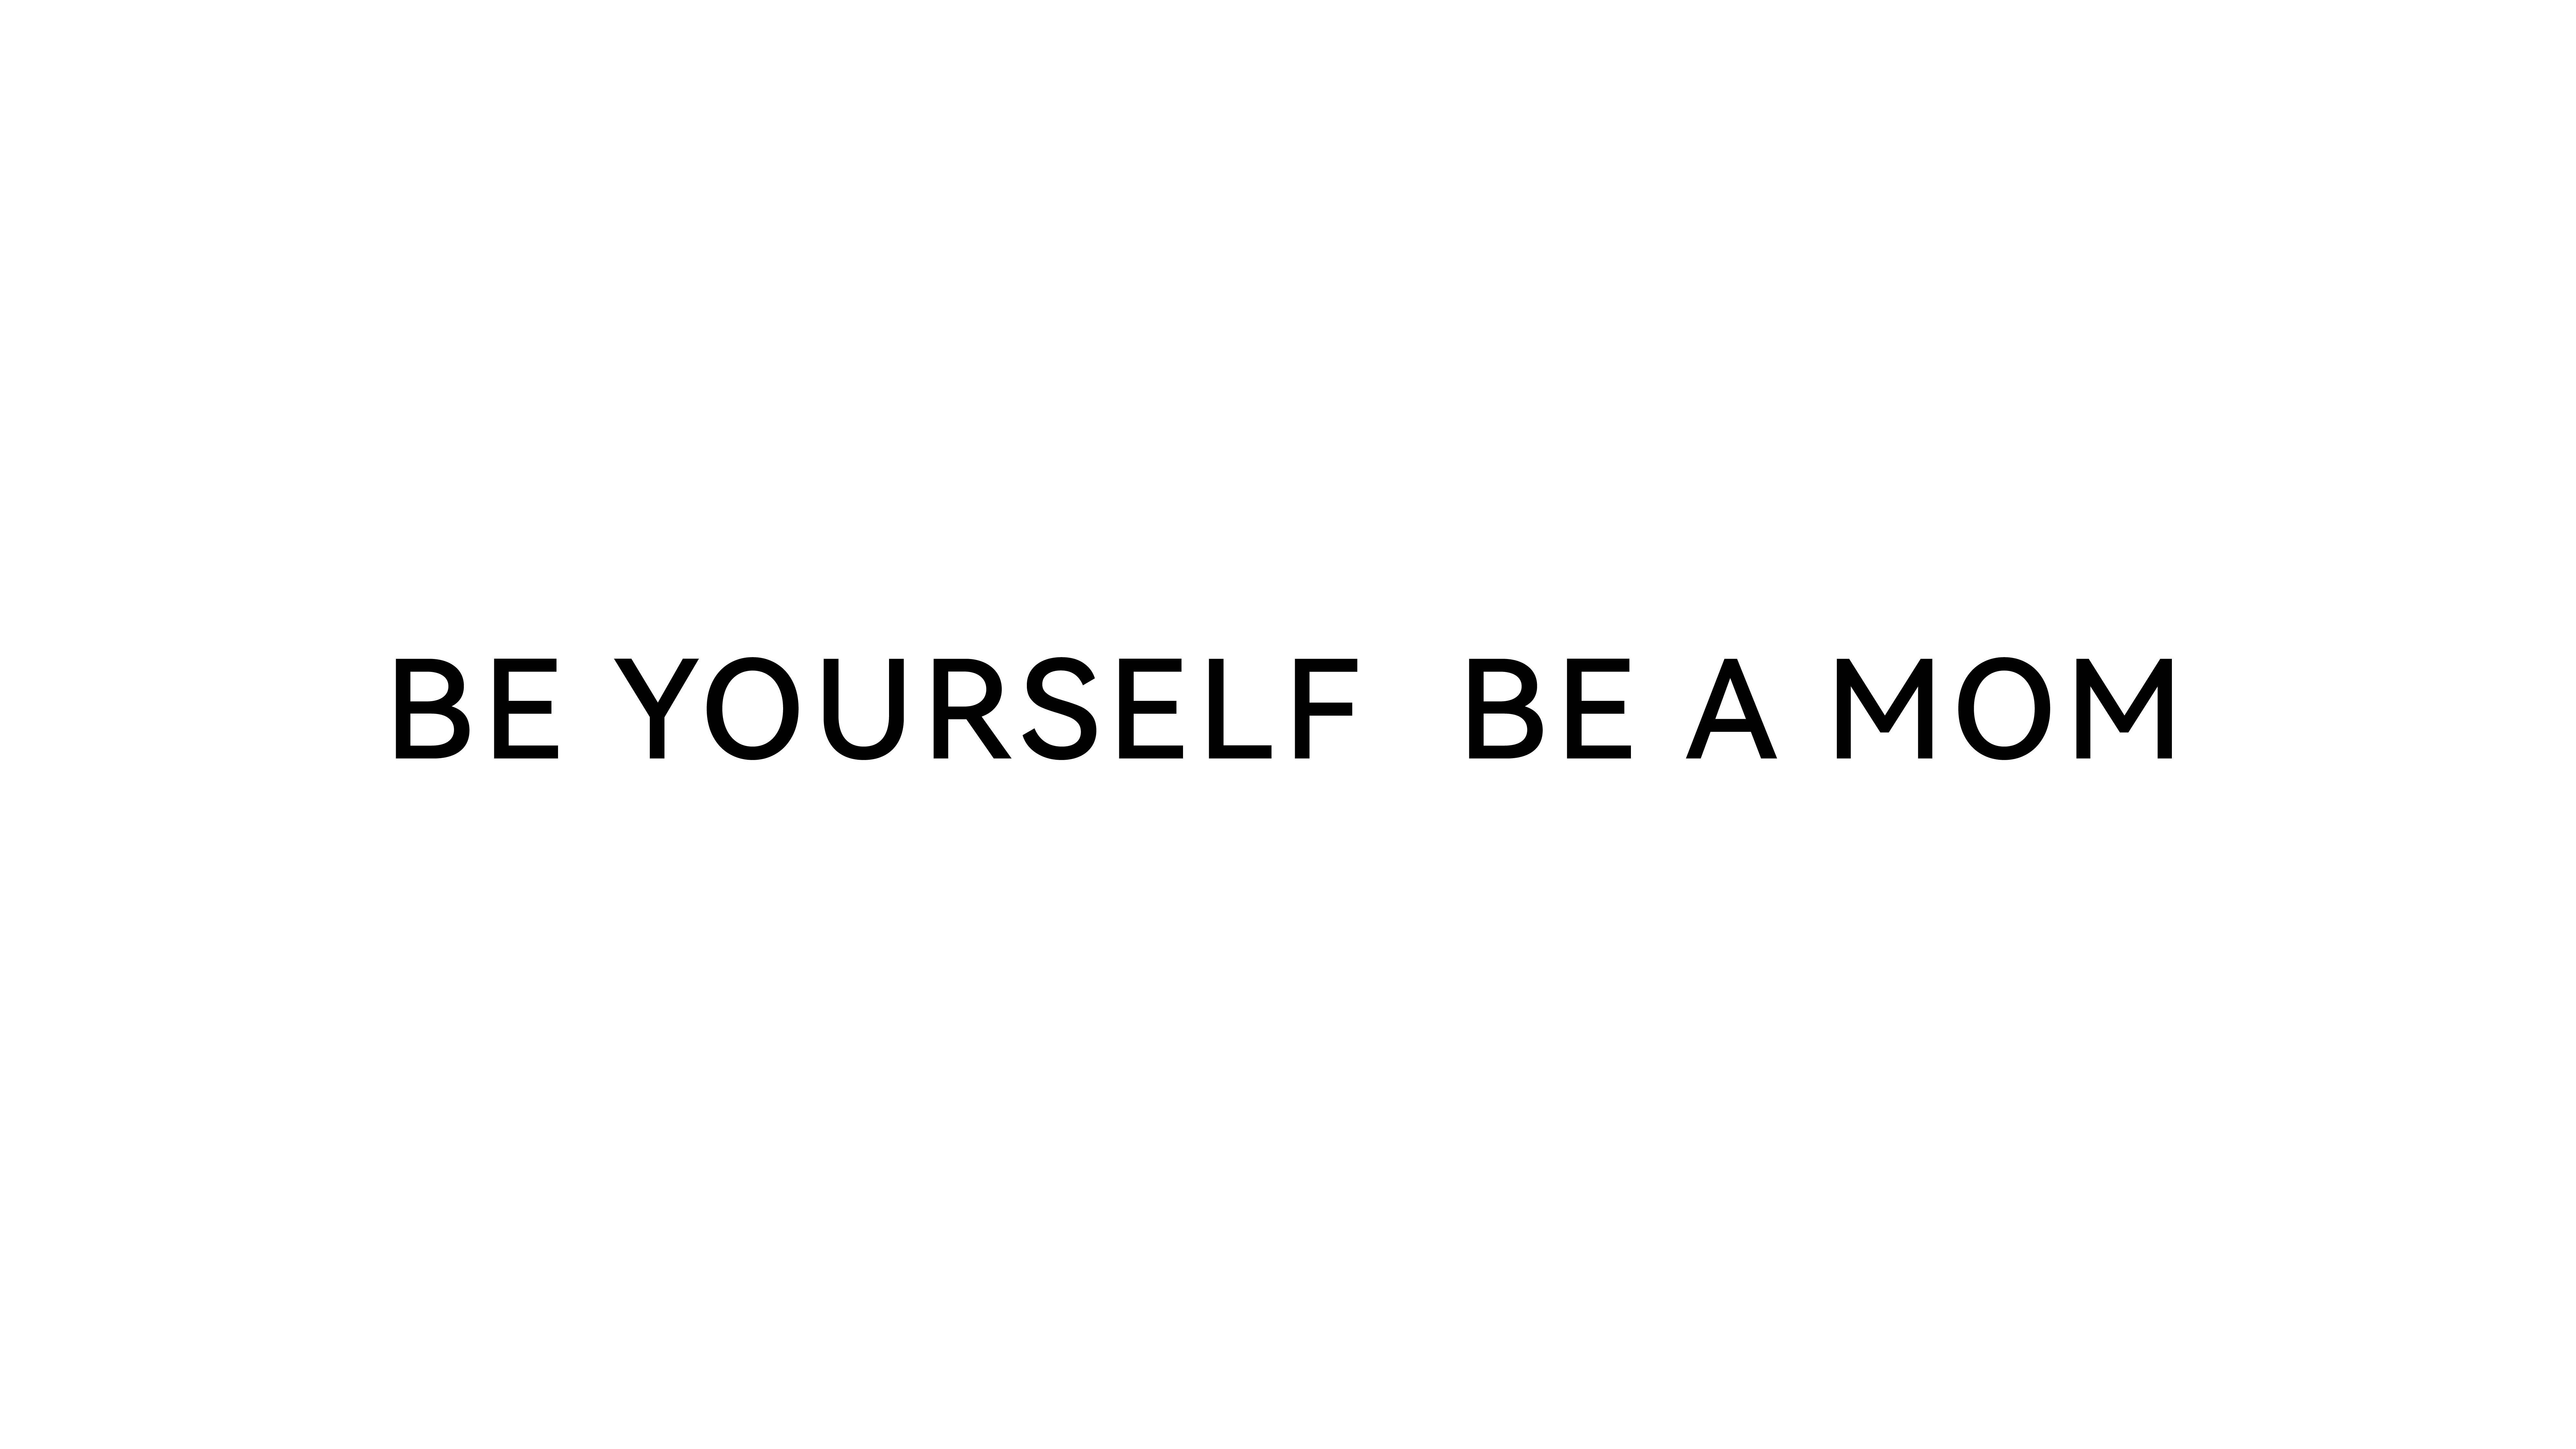  BE YOURSELF BE A MOM